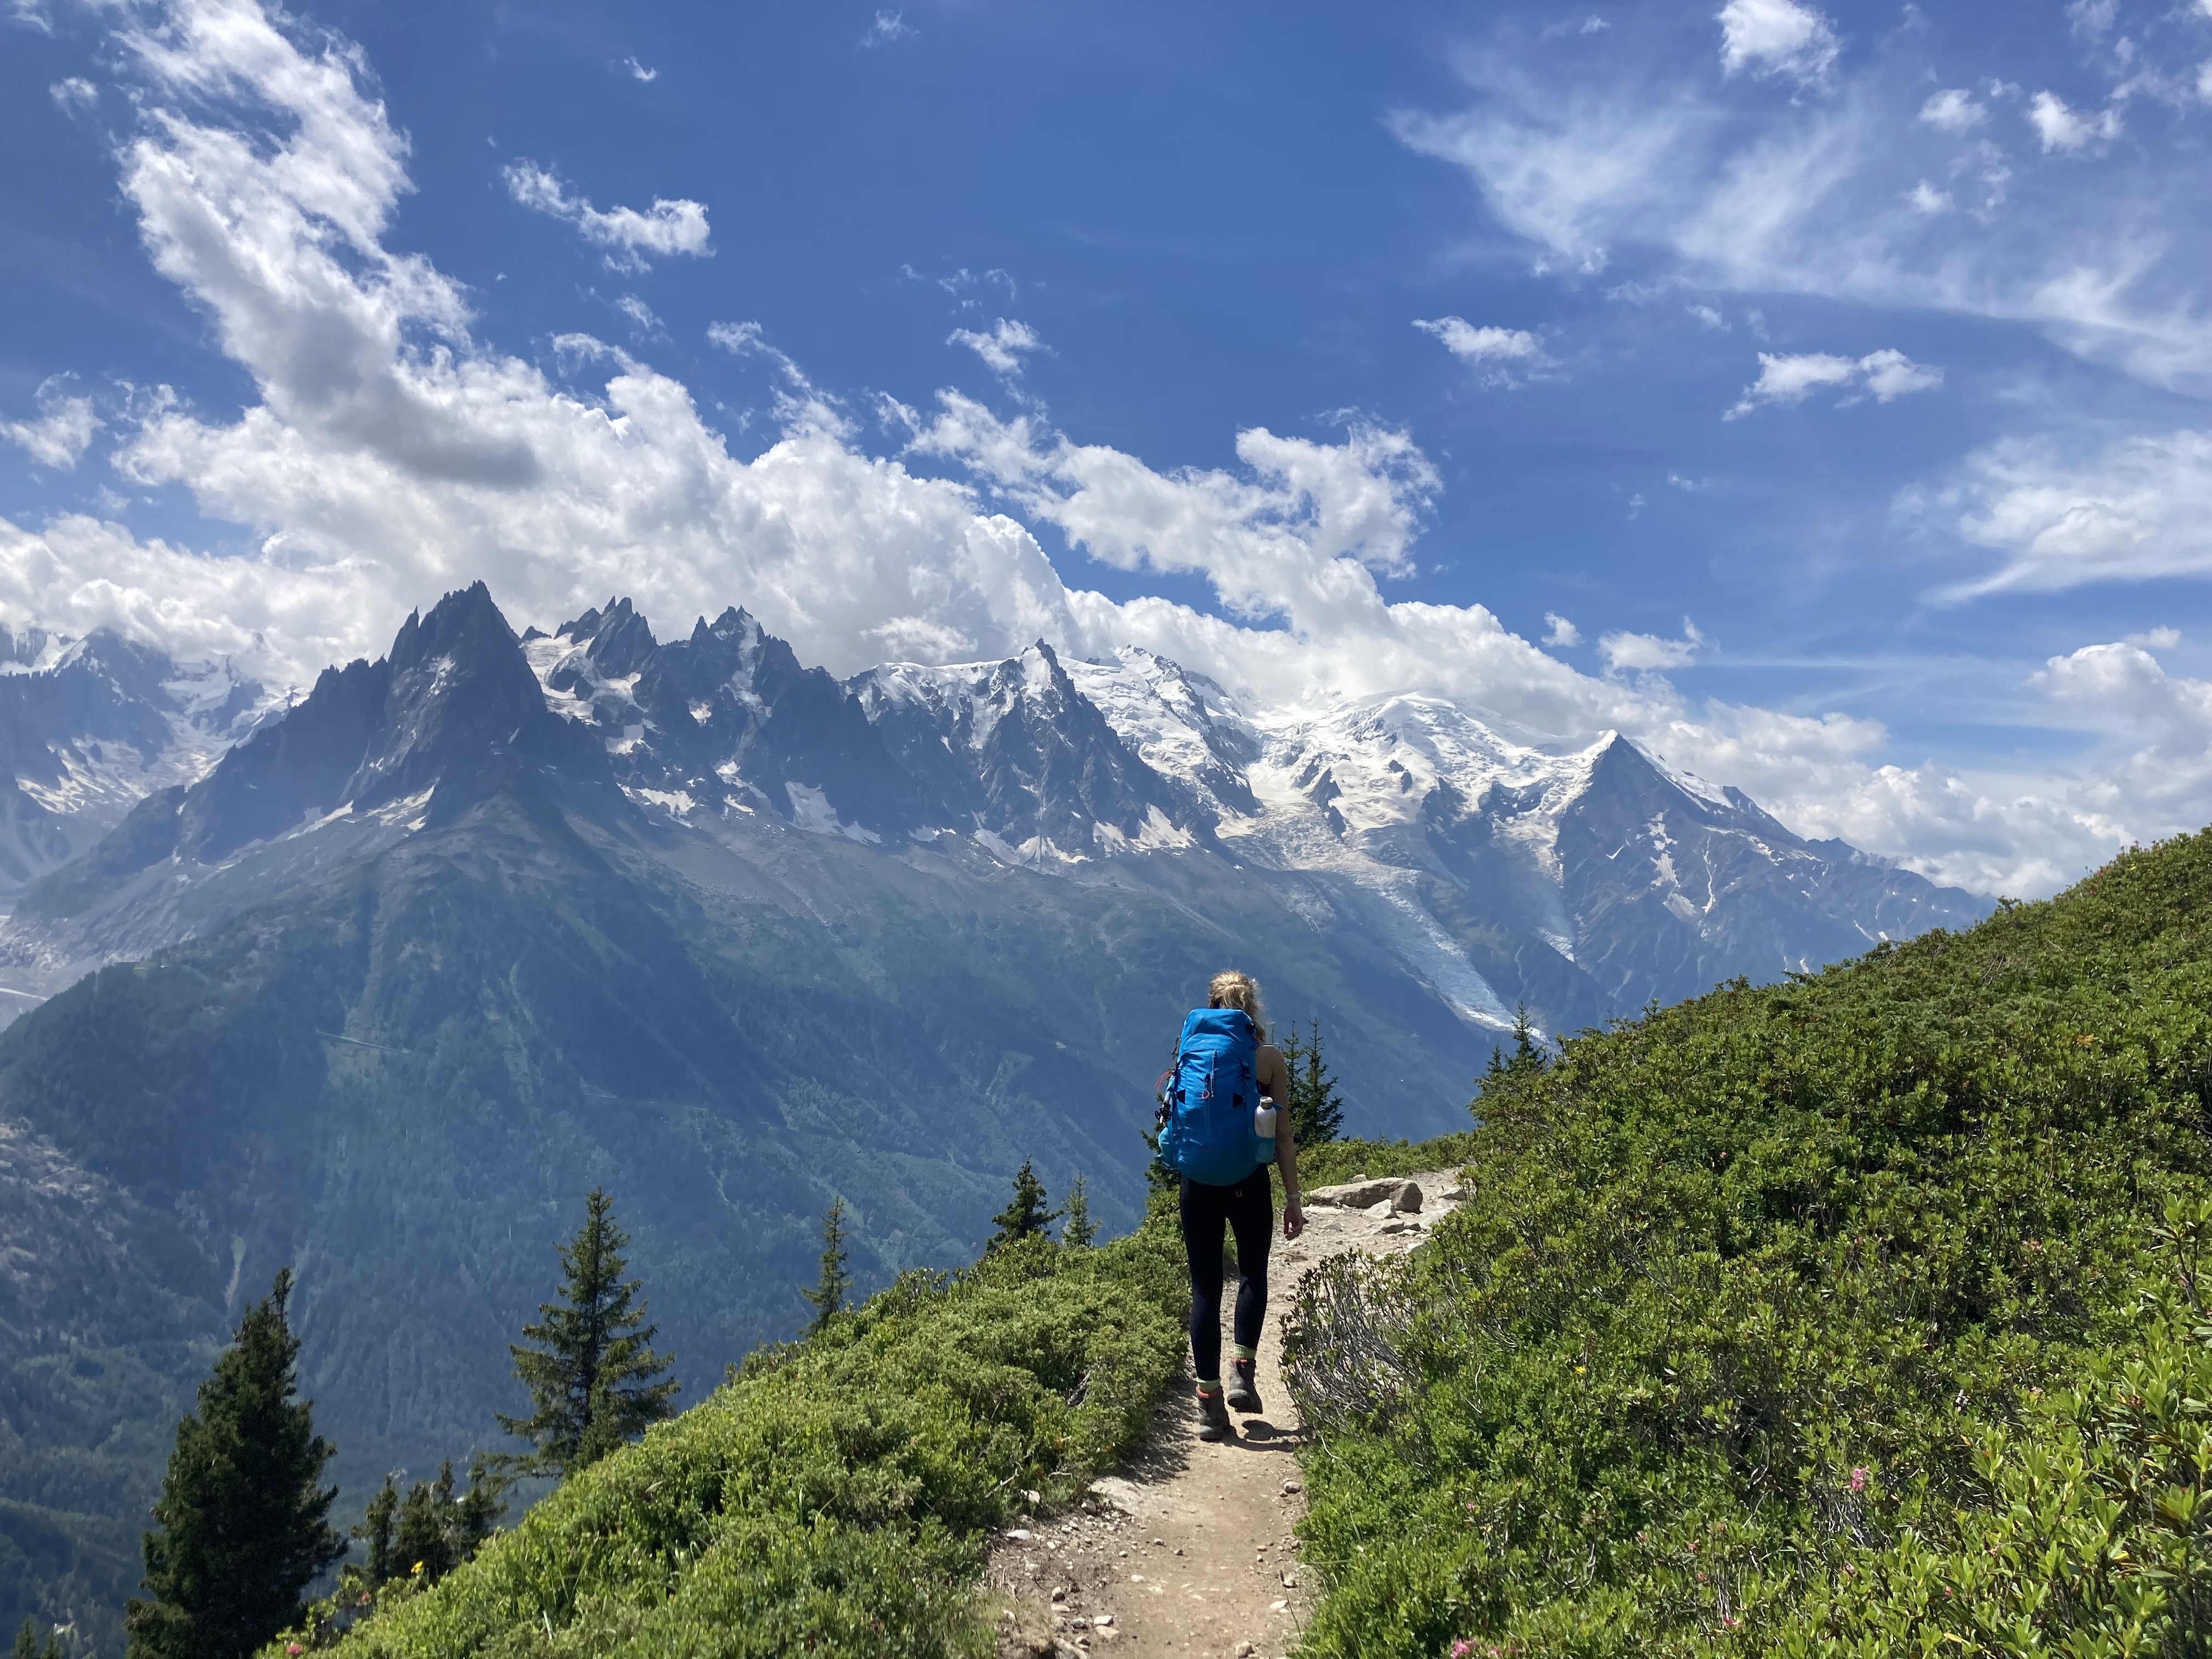 Views across the Mont Blanc massifs from the Grand Balcon Sud route in Chamonix